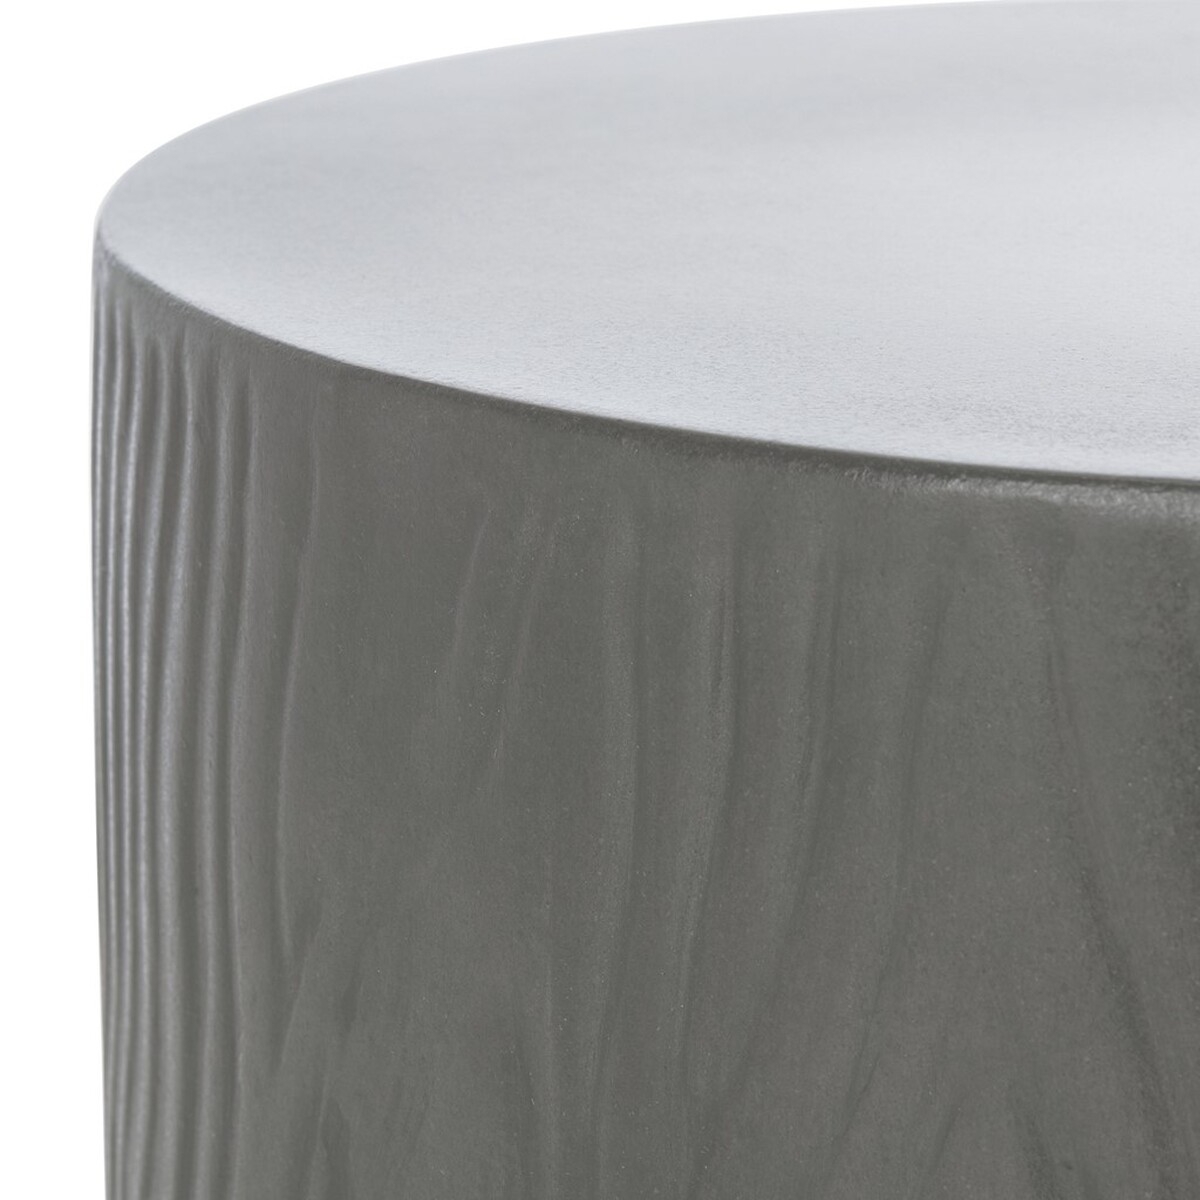 Trunk Indoor/Outdoor Modern Concrete Round 16.5-Inch H Accent Table - Dark Grey - Arlo Home - Image 1